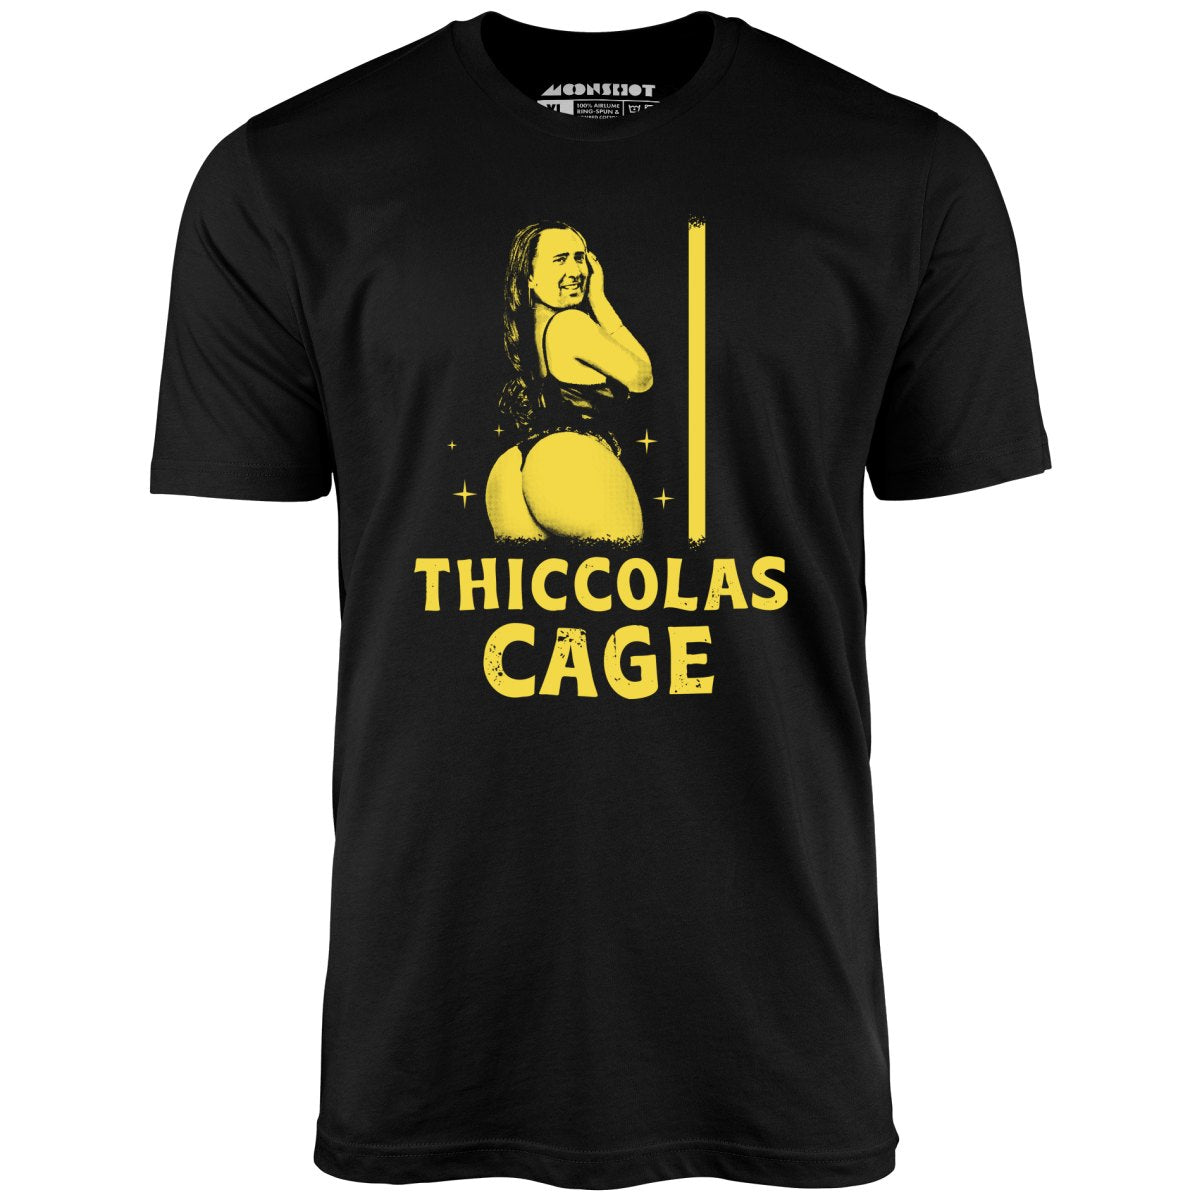 Thiccolas Cage - Unisex T-Shirt